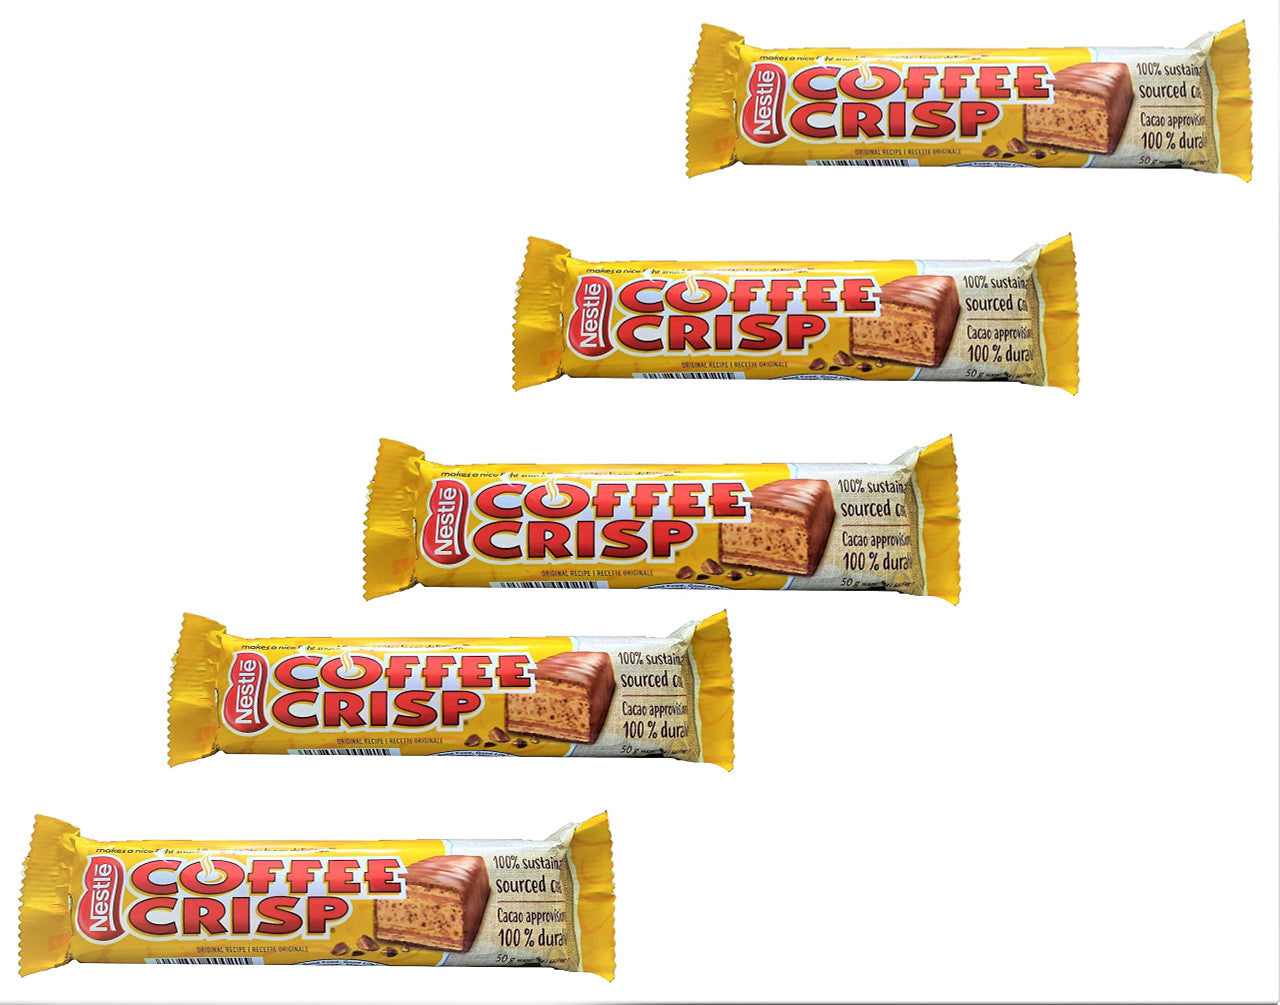 Canadian Snacks Value Pack - Coffee Crisp bars (5x50g) & Smarties (4x45g) - Made by Nestle Canada [Imported From Canada]